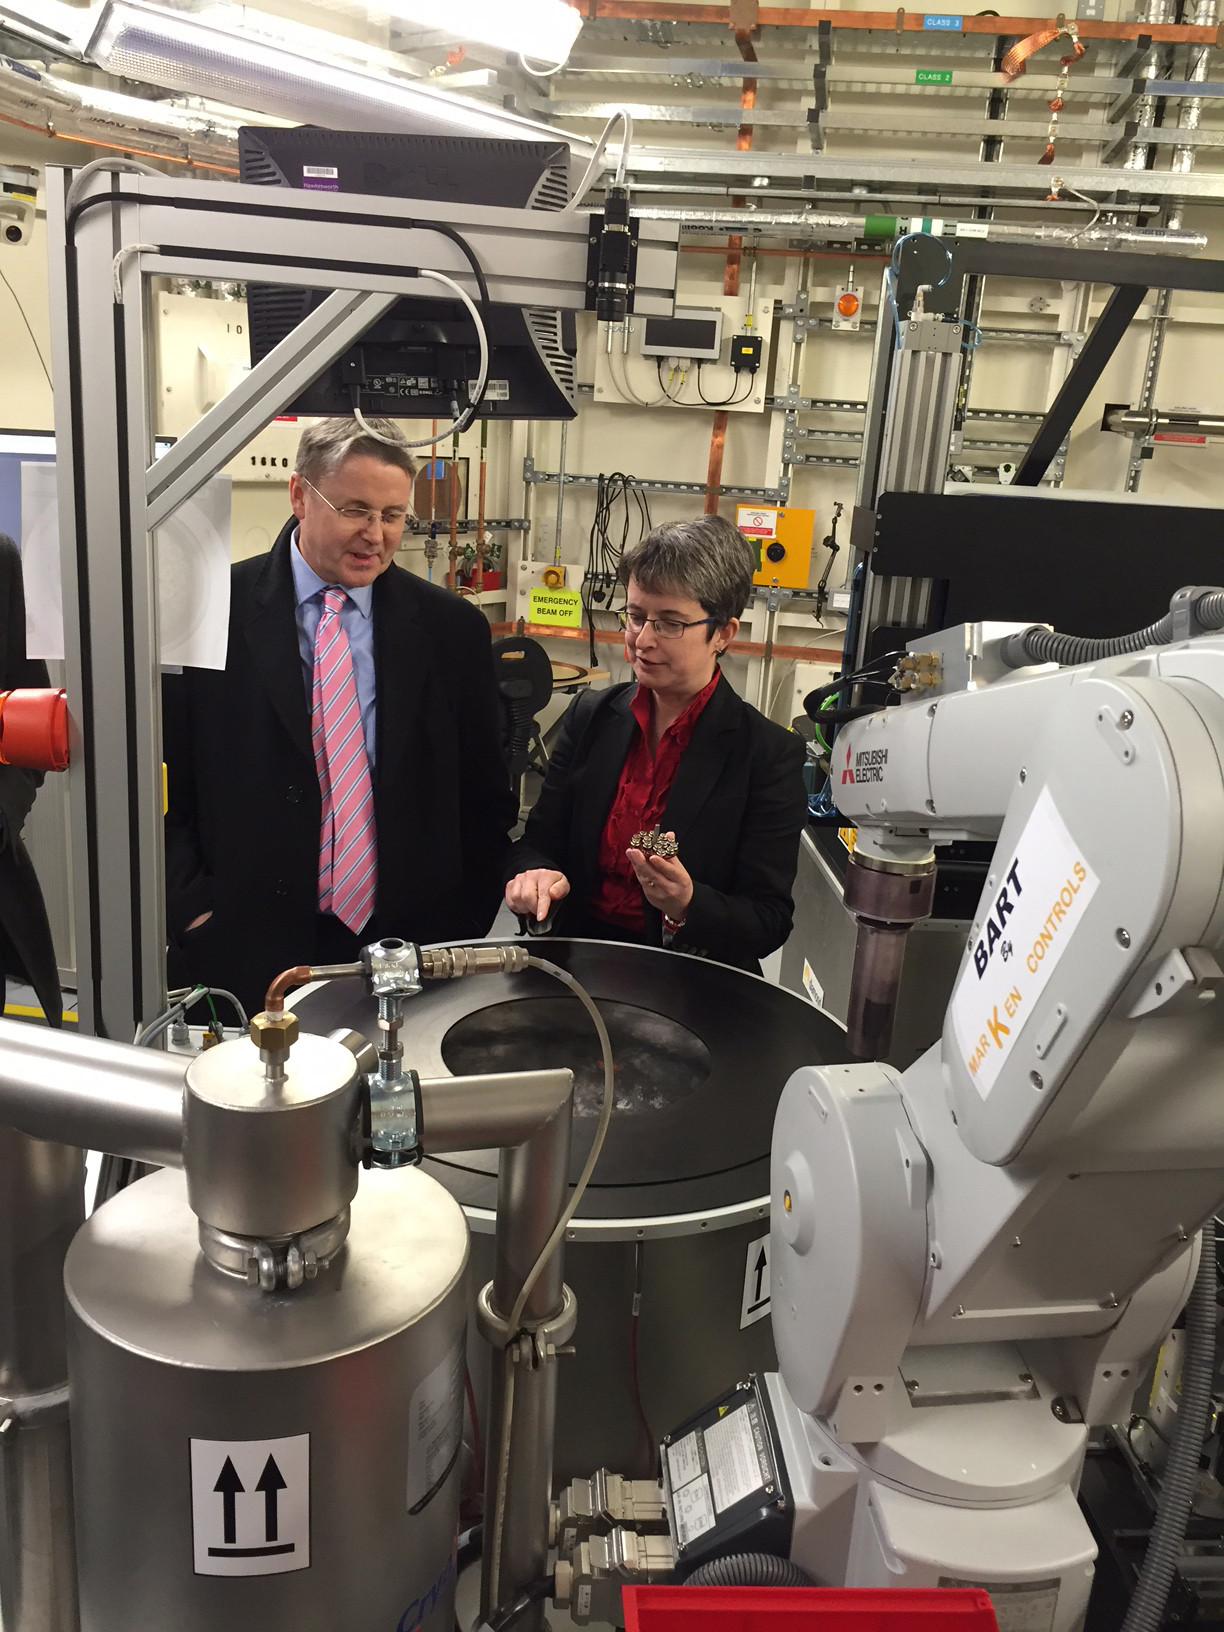 Sir Jeremy Heywood, Cabinet Secretary and Head of the Civil Service with Elizabeth Shotton, Head of Industrial Liaison at Diamond, on Beamline I04-1.